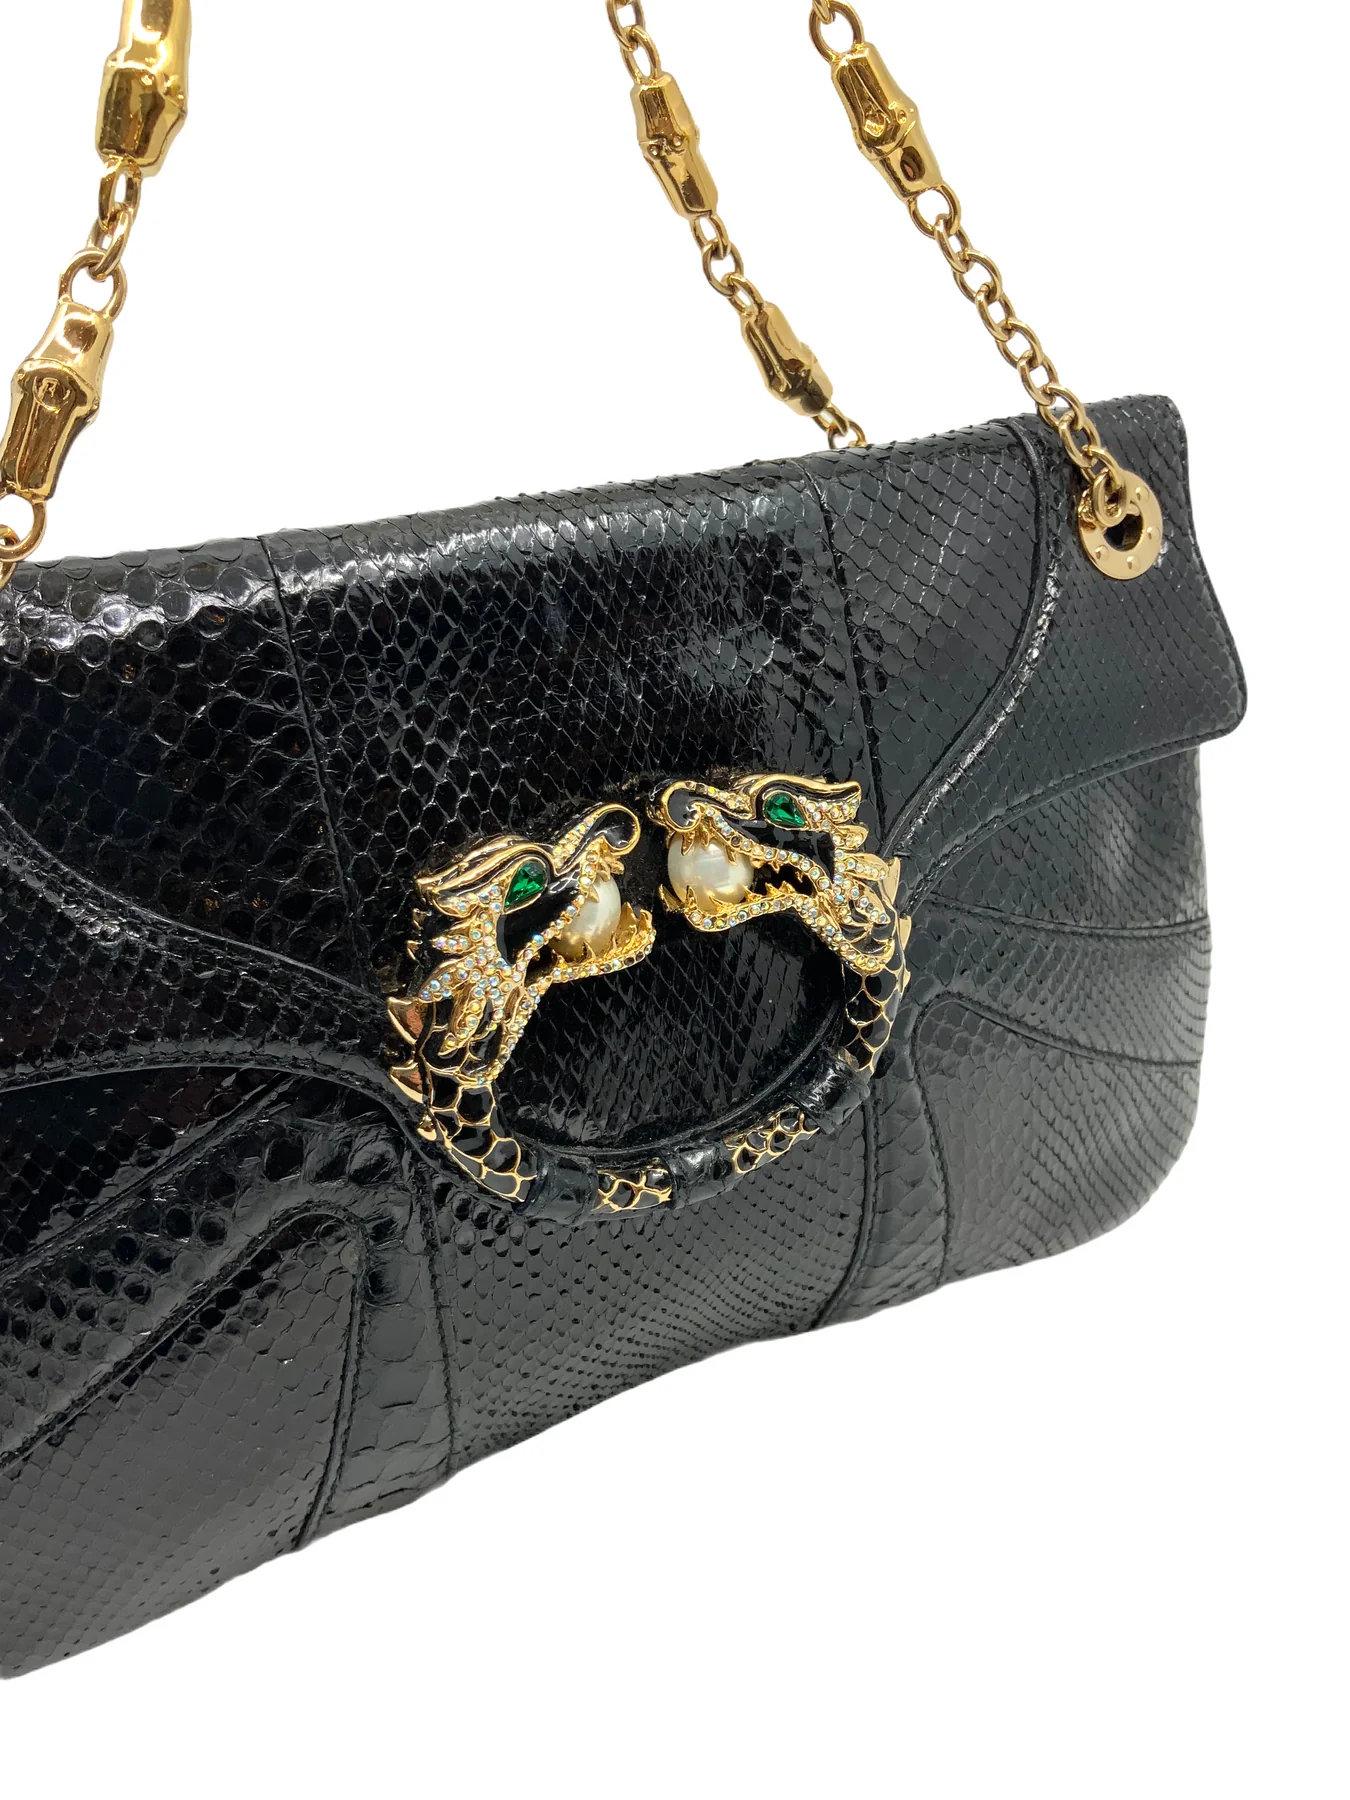 Gucci Limited Edition Tom Ford for Gucci

Leather Jeweled Dragon Bag featuring gold-tone chain link shoulder straps and a crystal-embellished double headed dragon on the flap.
Black snakeskin 
Double chain link straps, 7